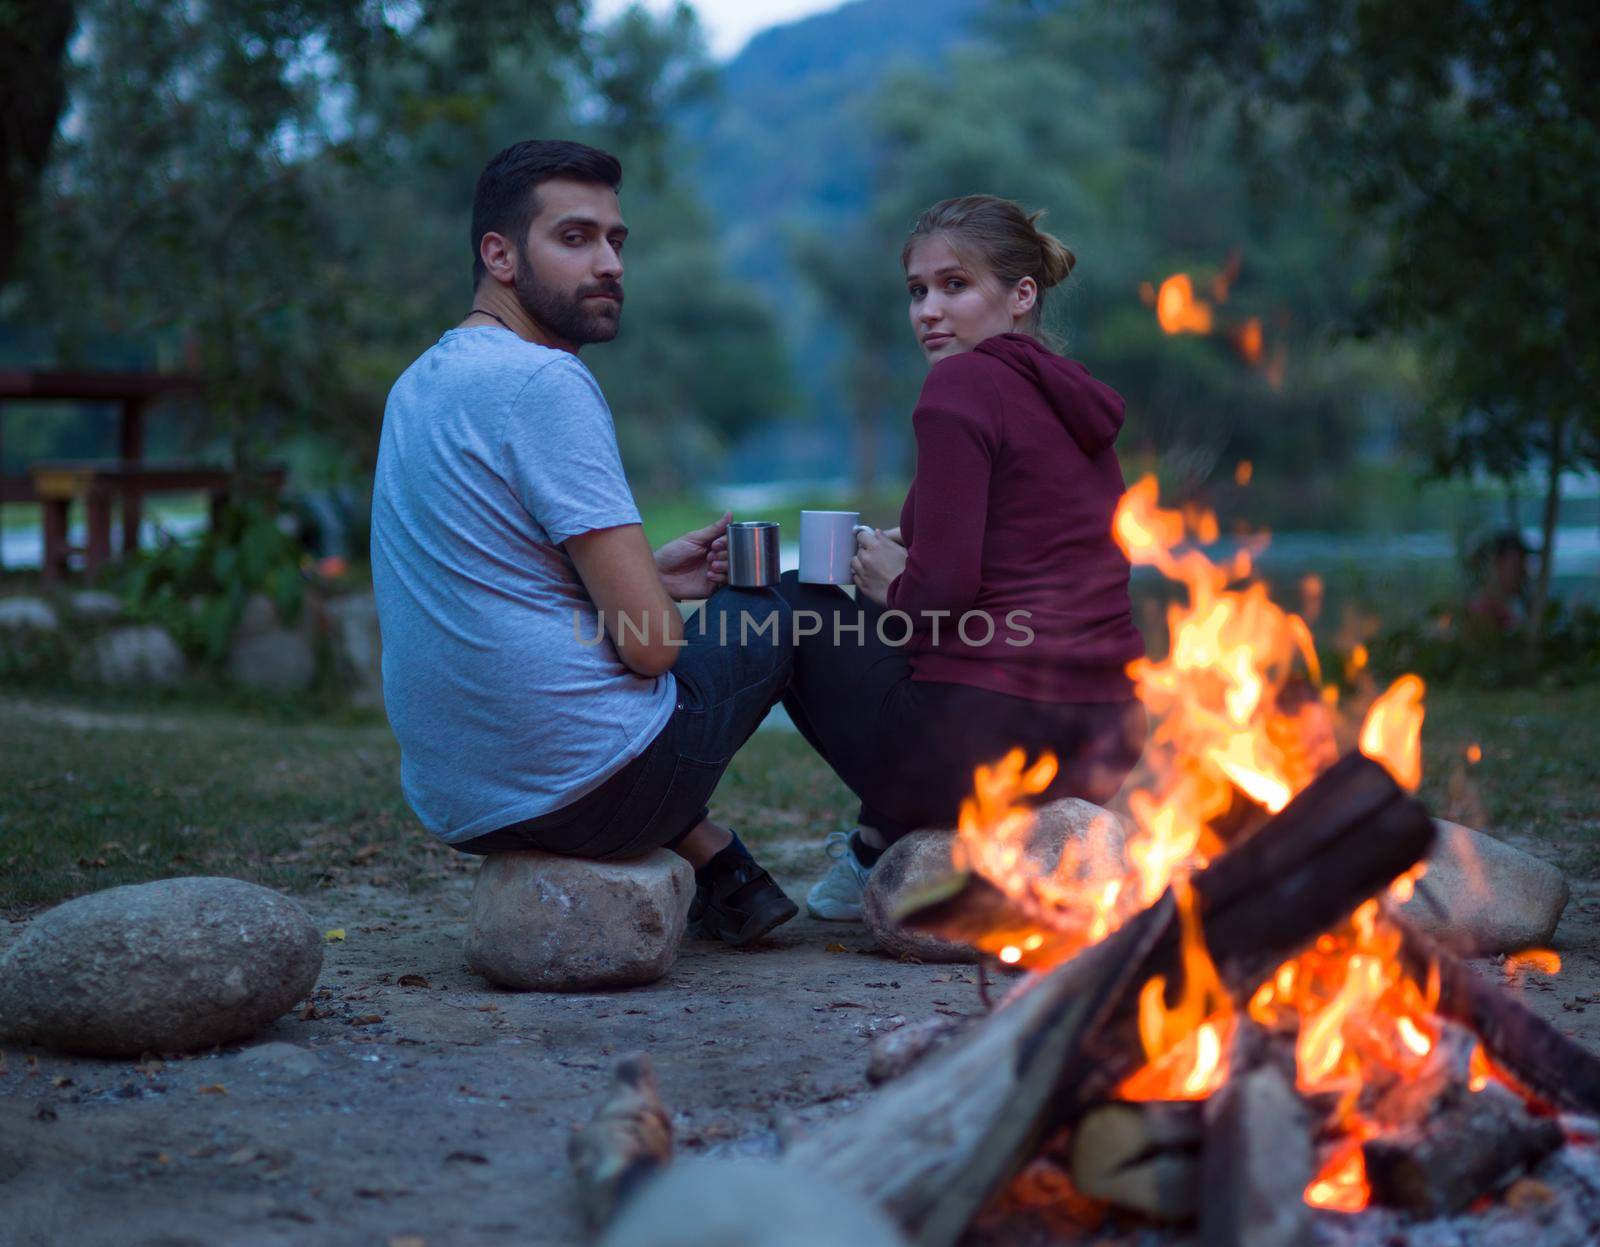 Young couple sitting around the campfire at evening holding a mugs of tea or coffee warming themselves